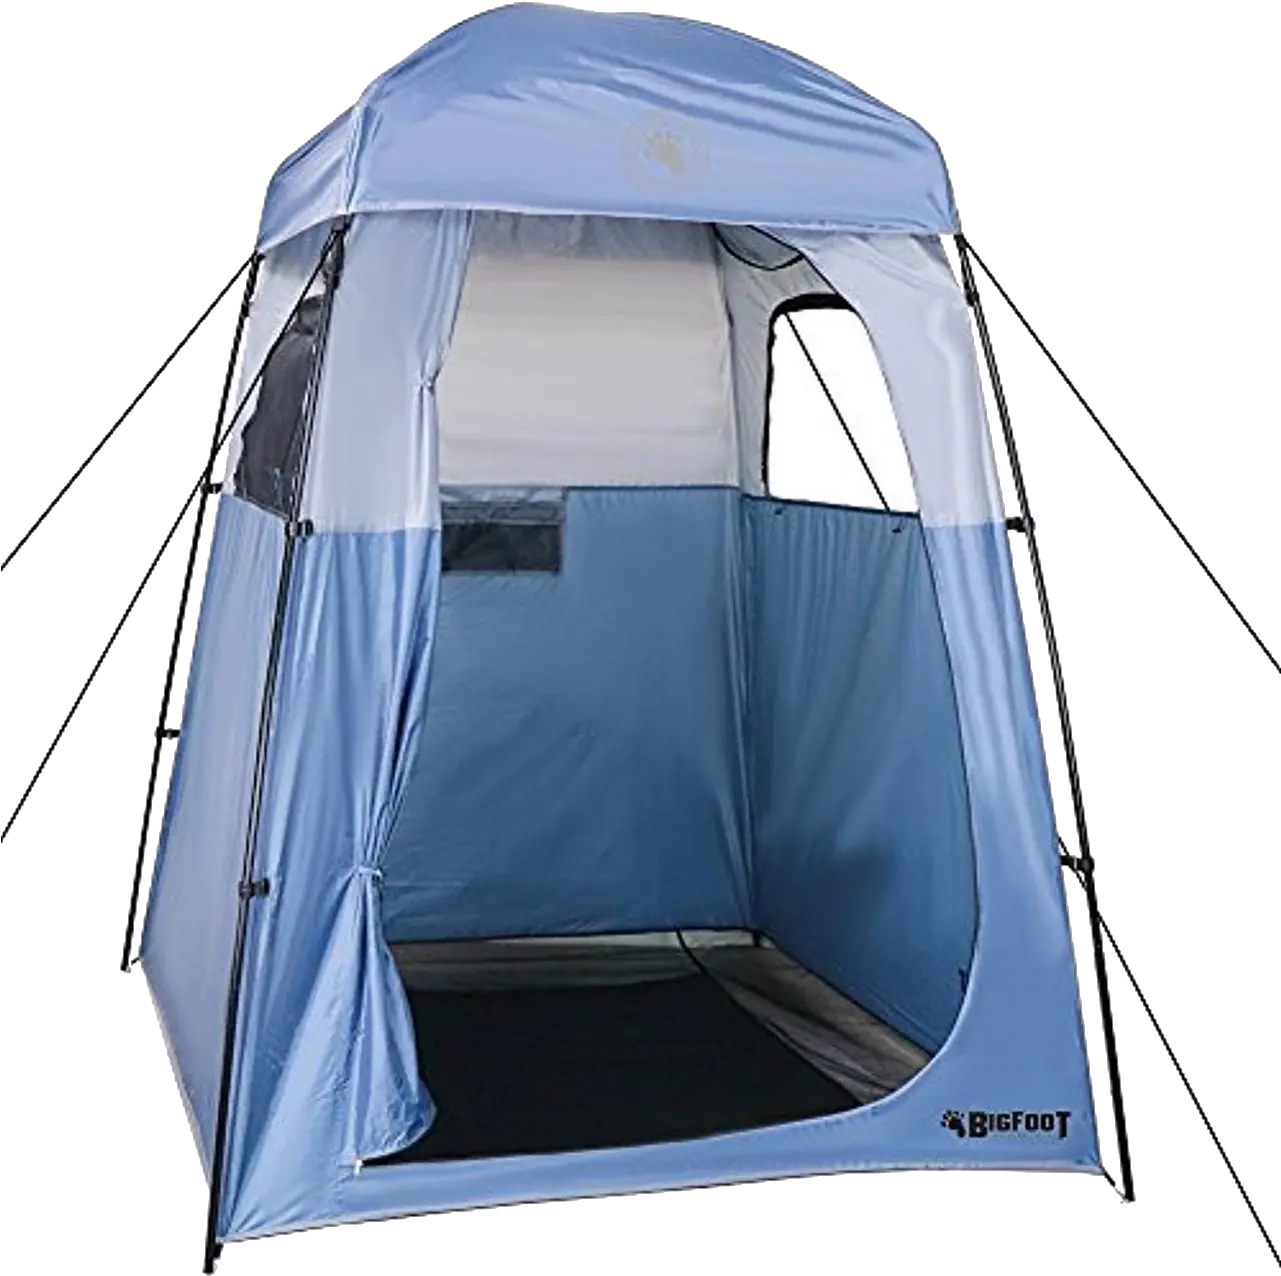 Camp Tent Png High Quality Image Png Arts Camping Tent Png